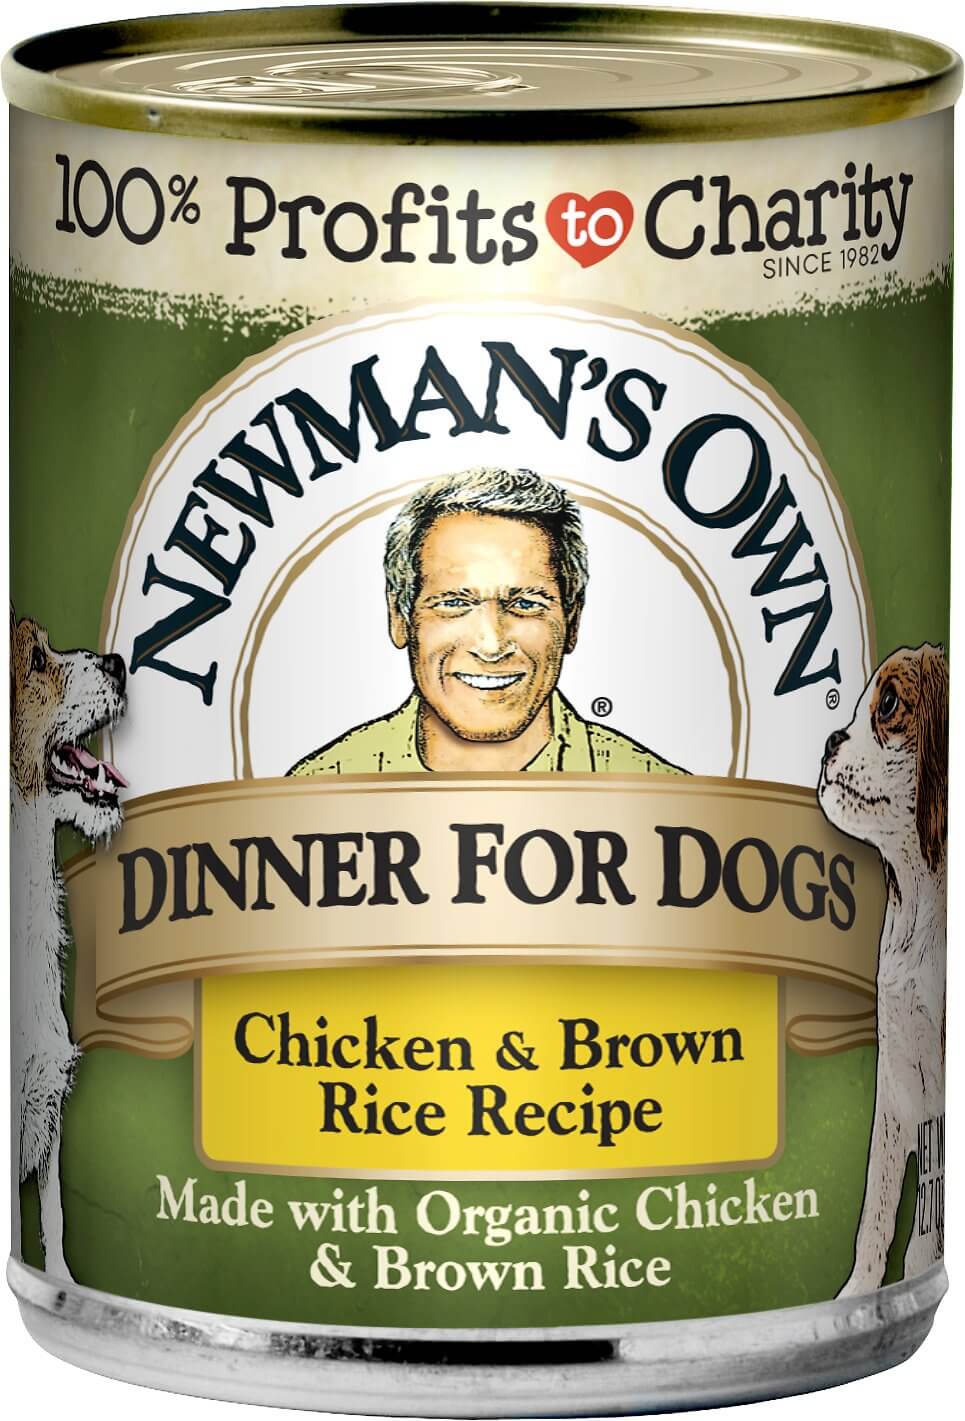 Newman’s Own Dinner for Dogs Review (Canned)